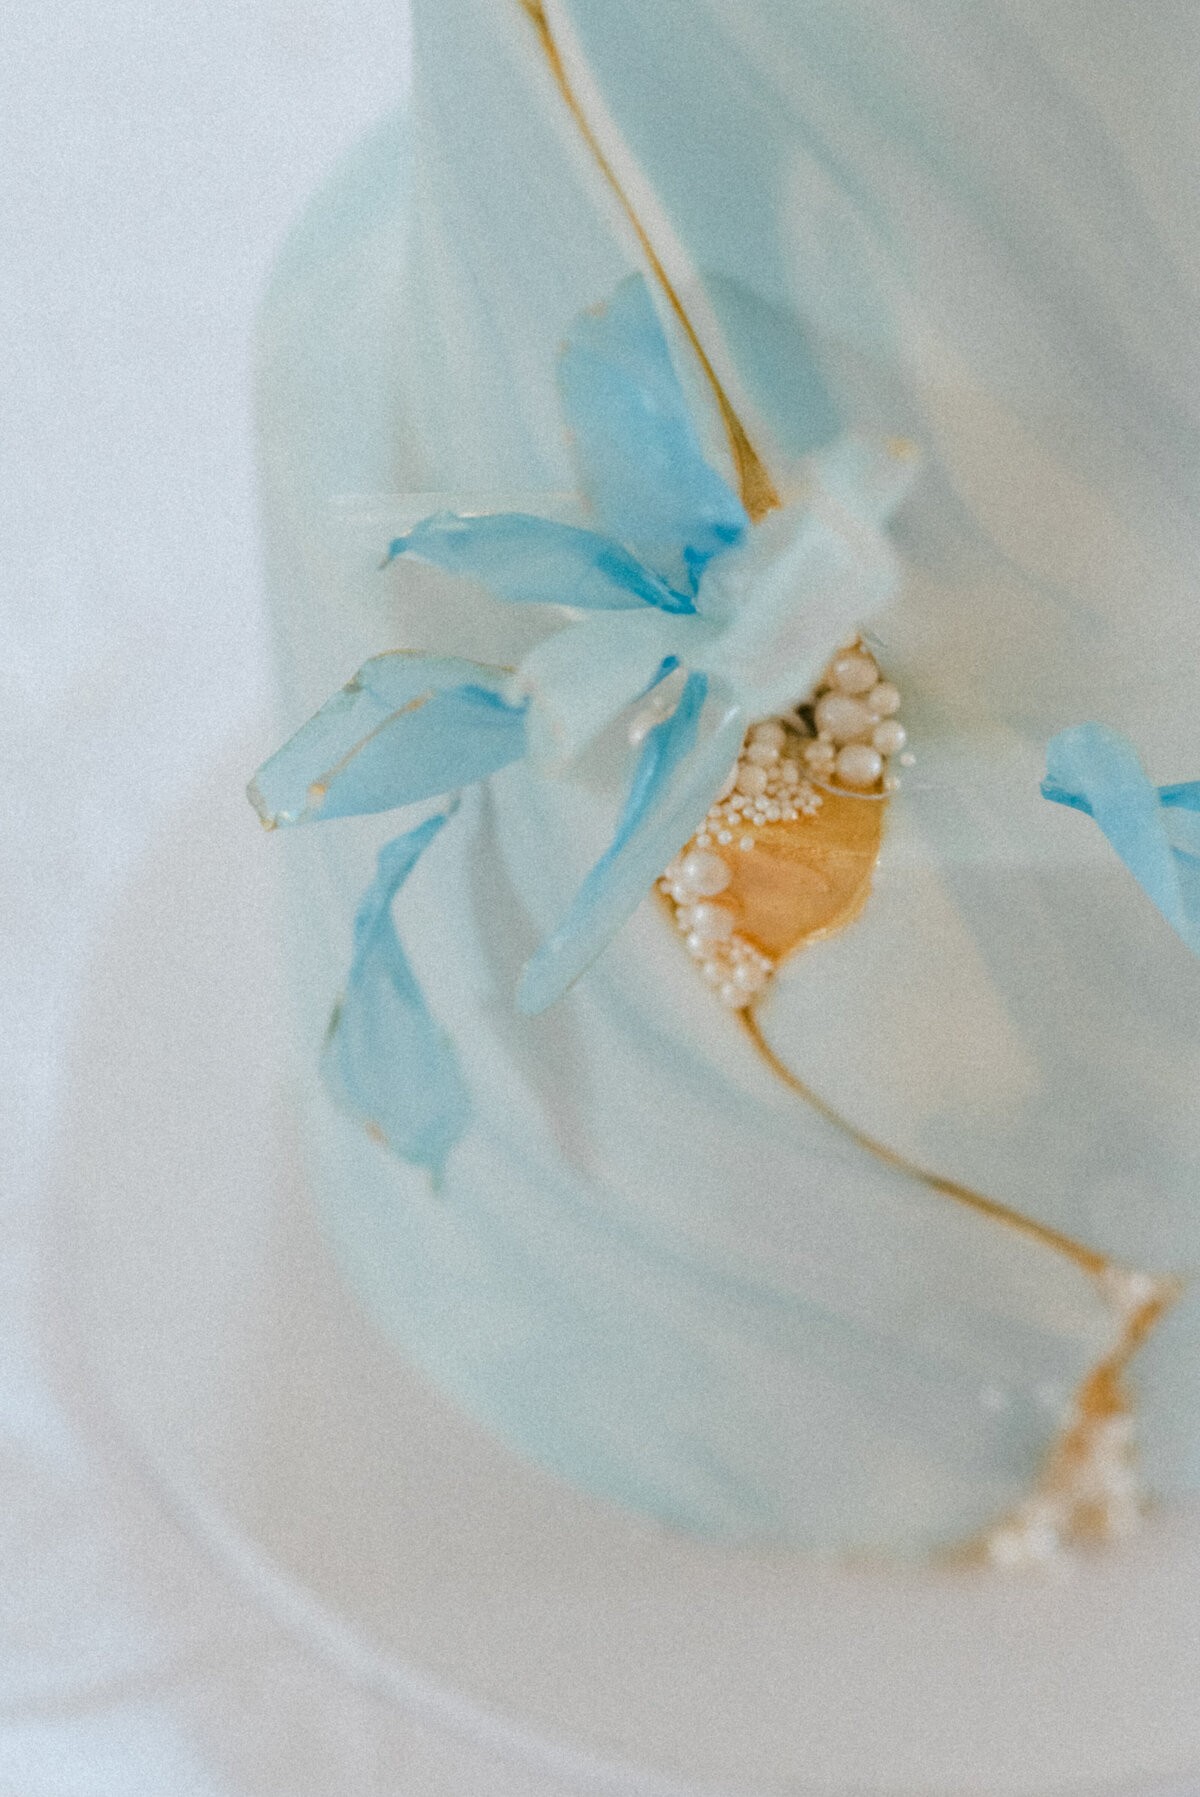 A detail of a wedding cake  in an image photographed by wedding photographer Hannika Gabrielsson.